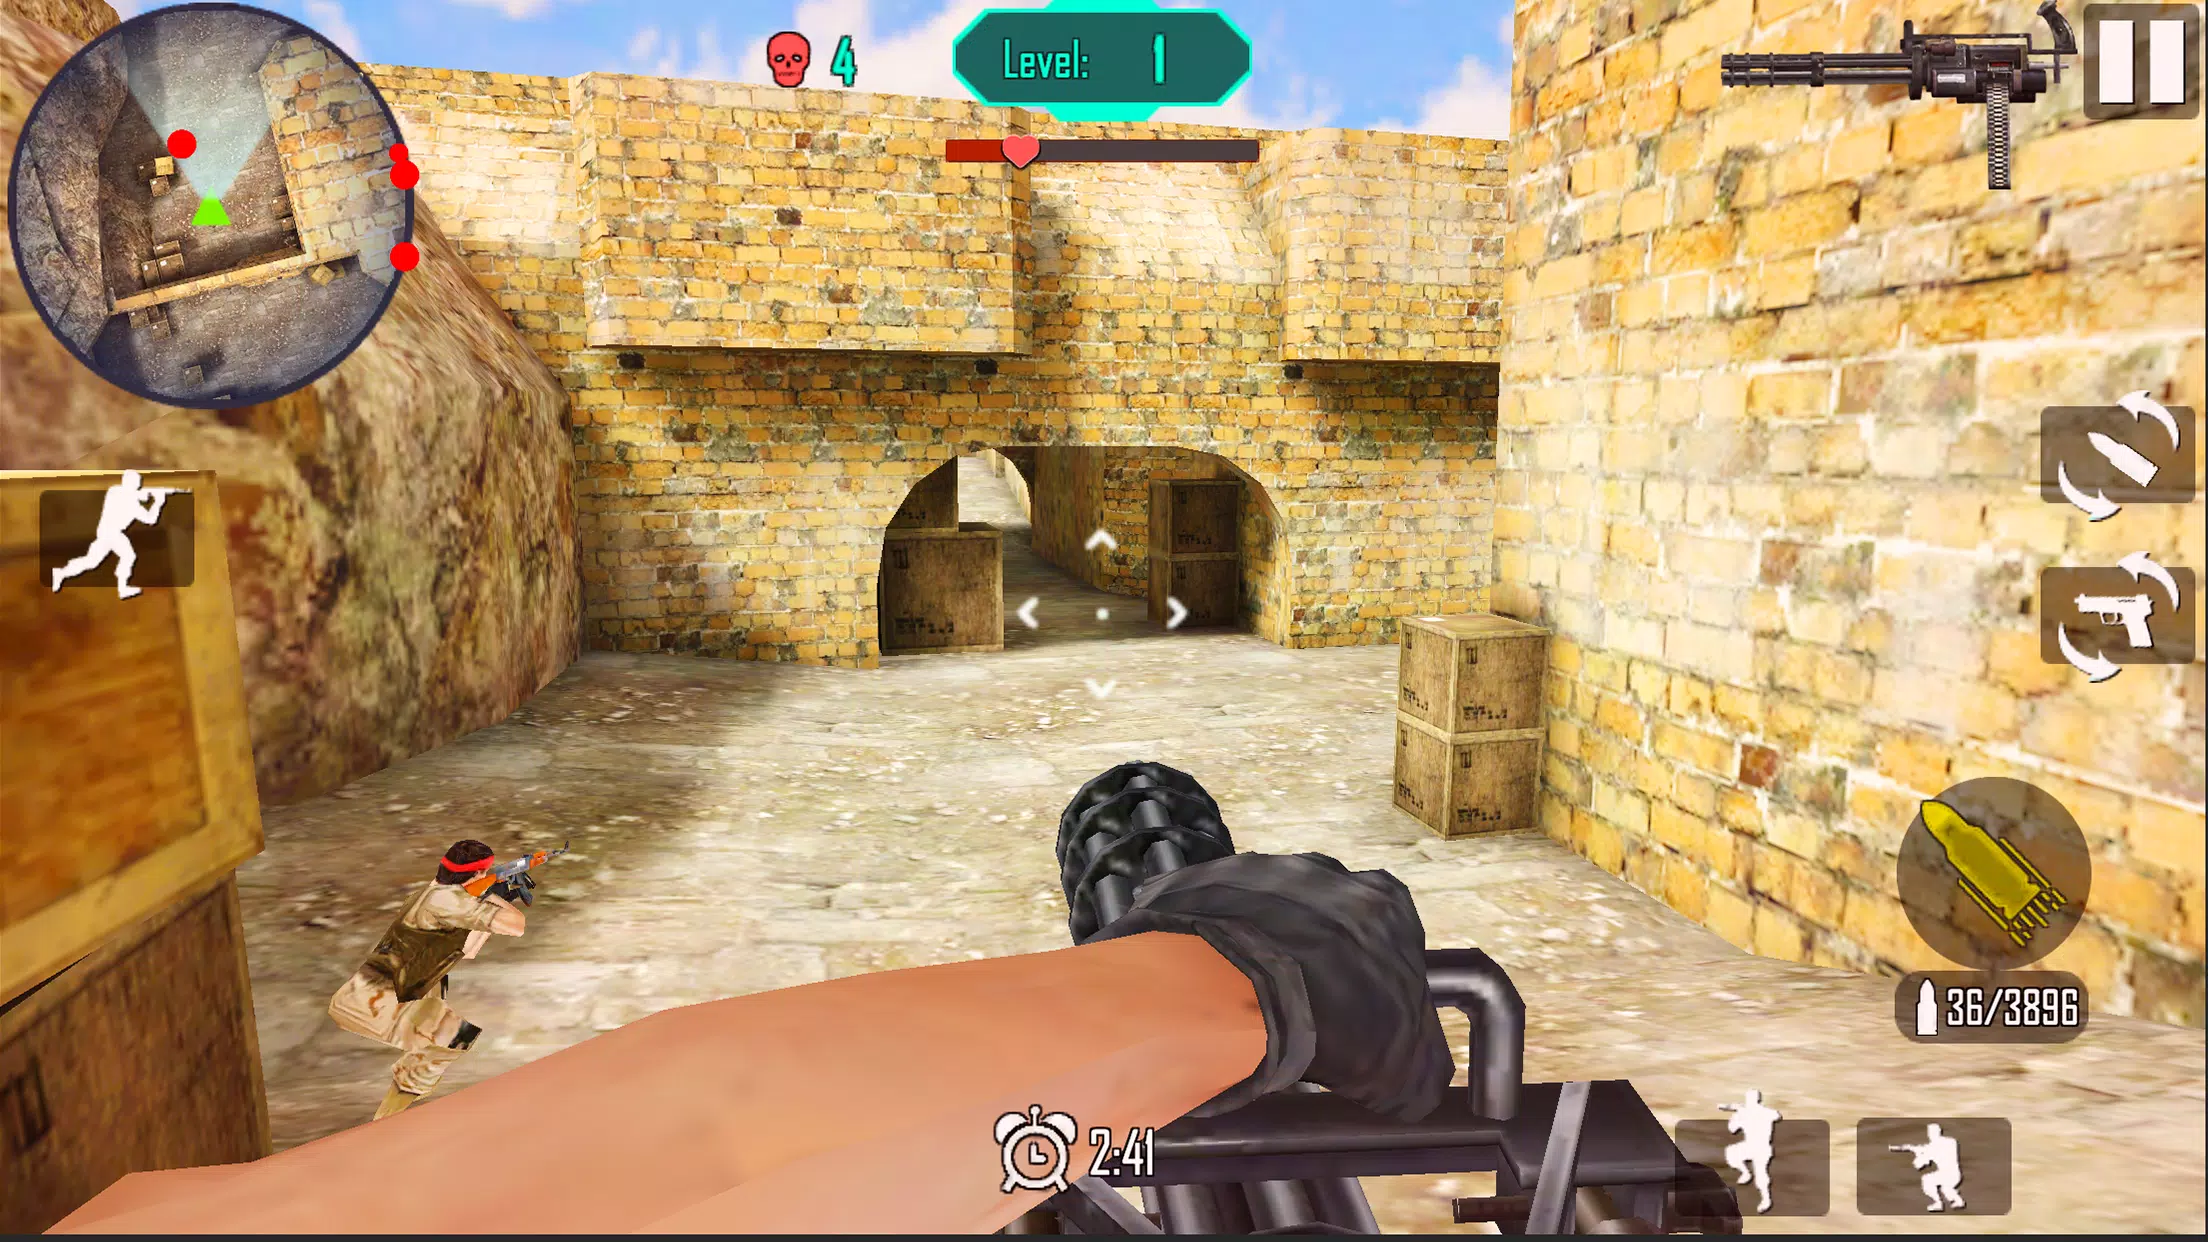 Call for War Gun Shooting Game - APK Download for Android